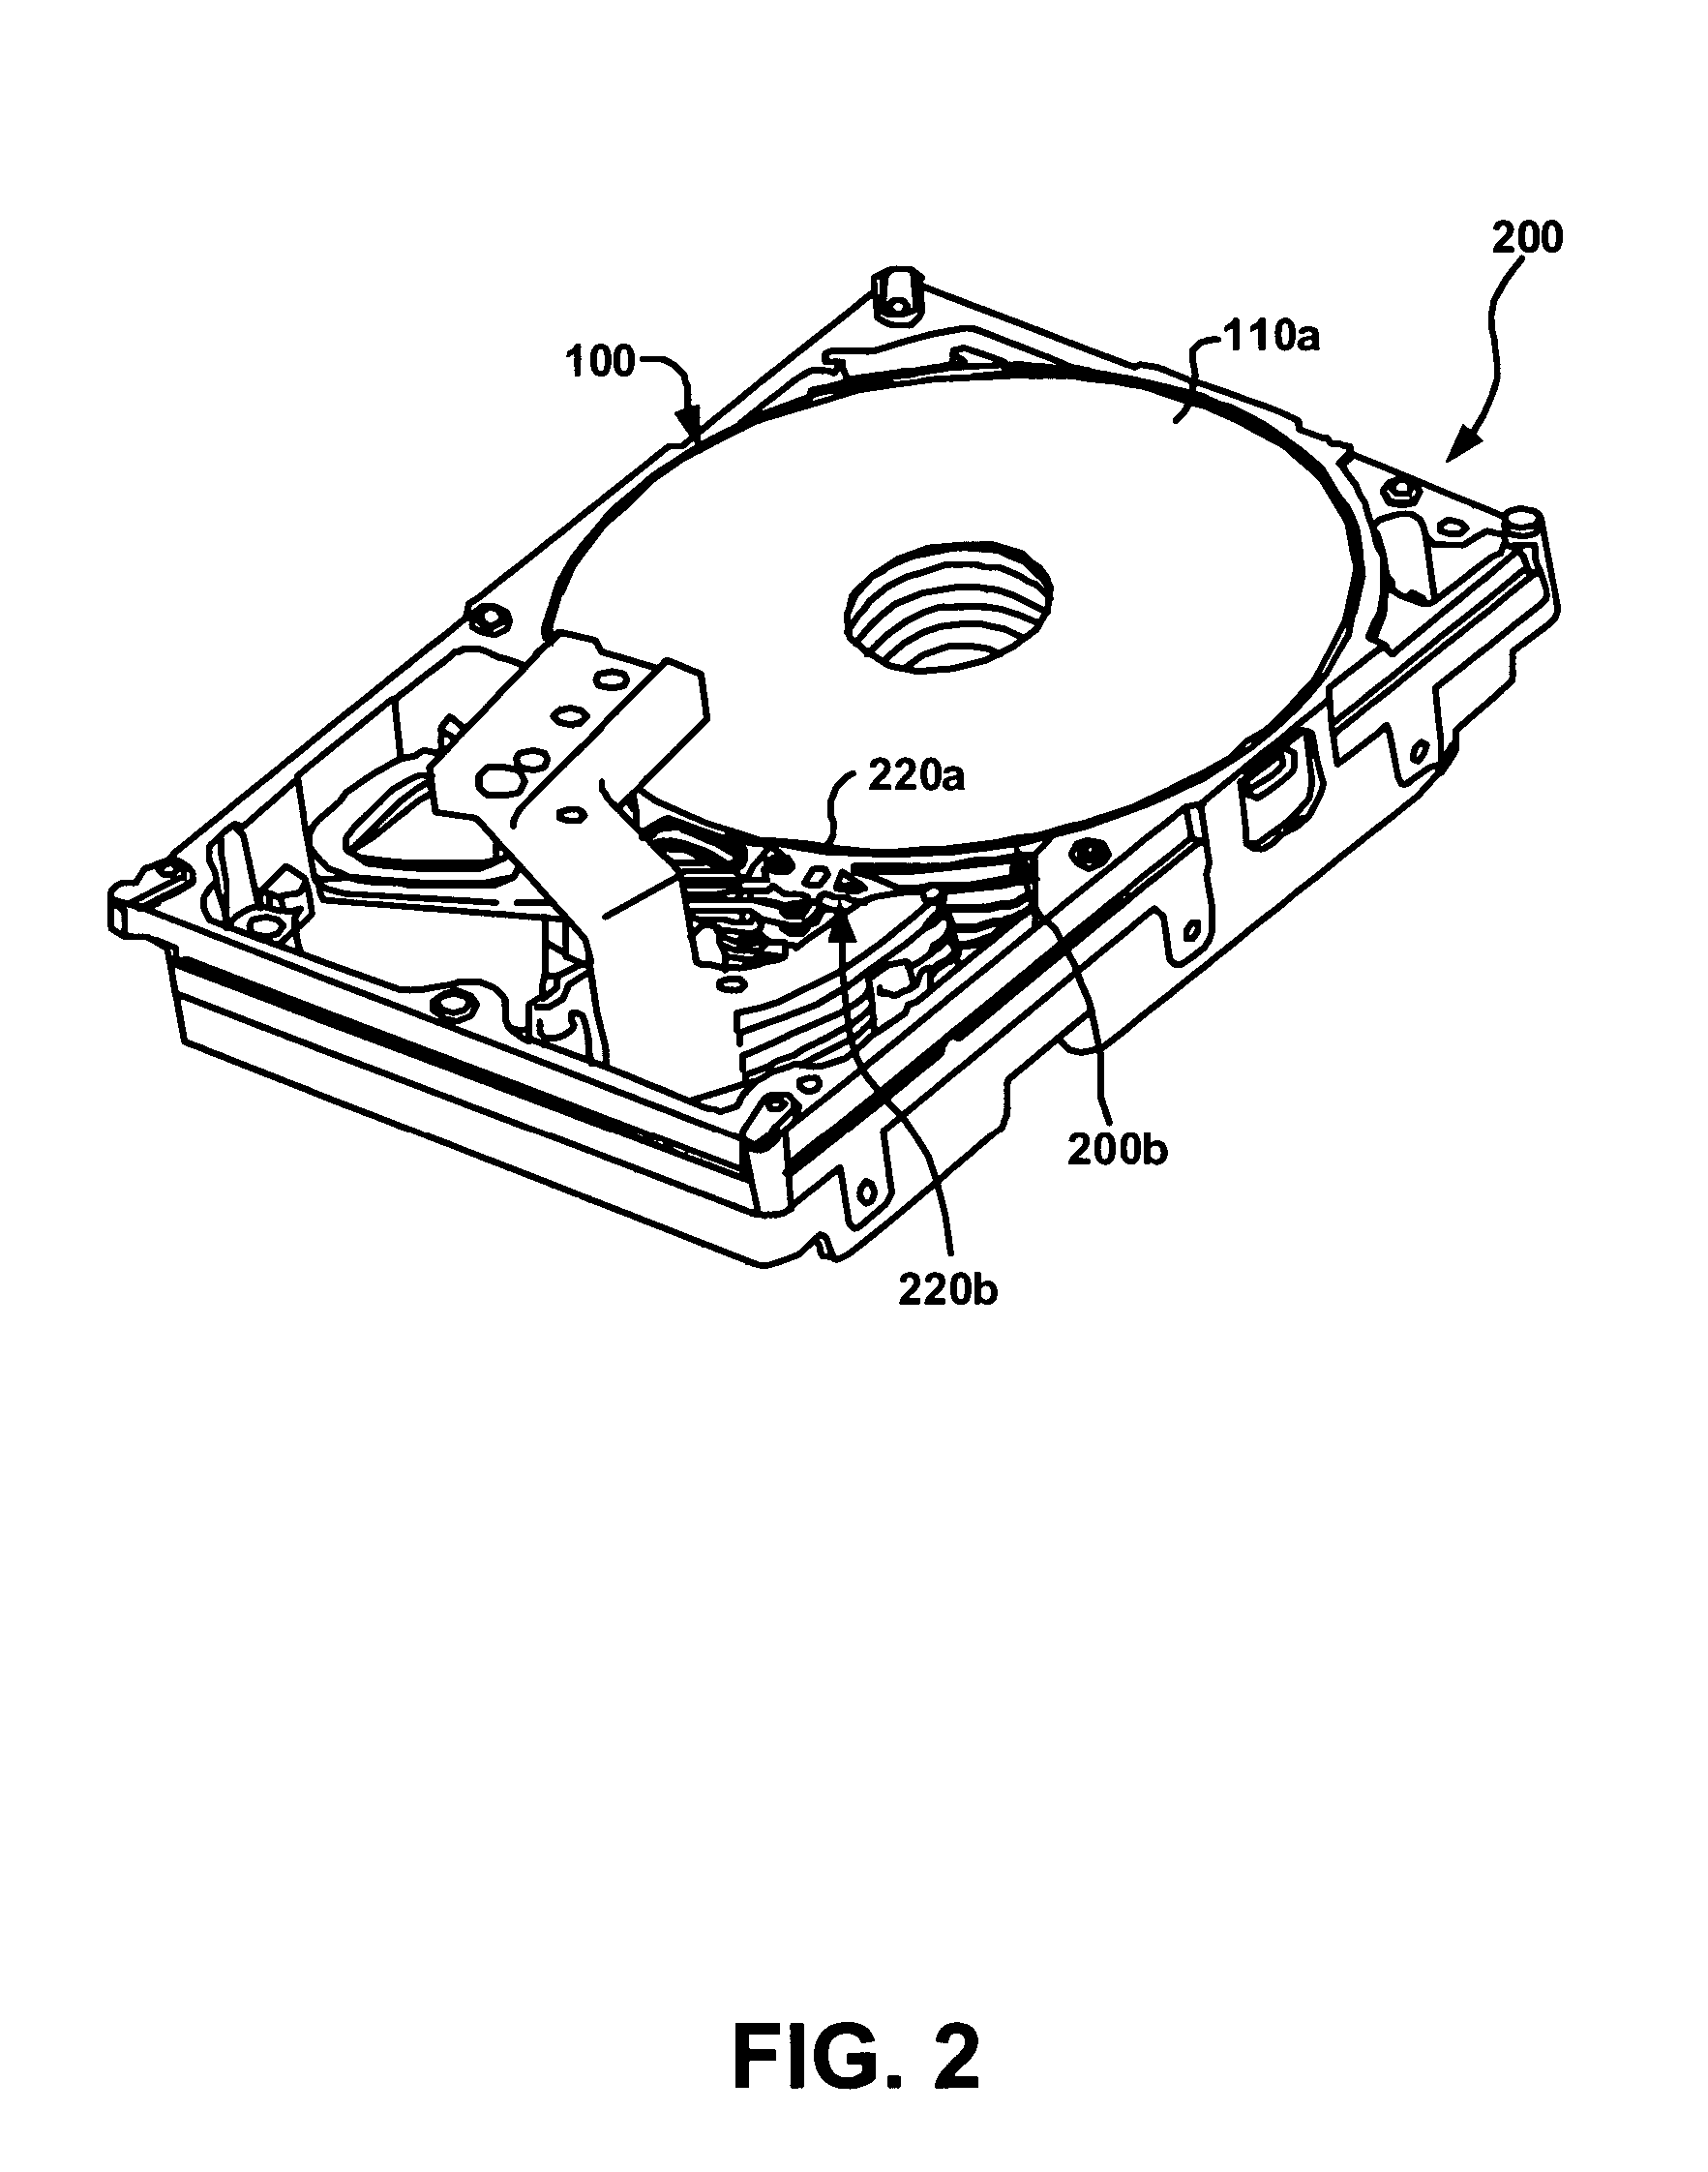 Disk pack swap process for evaluating magnetic recording performance